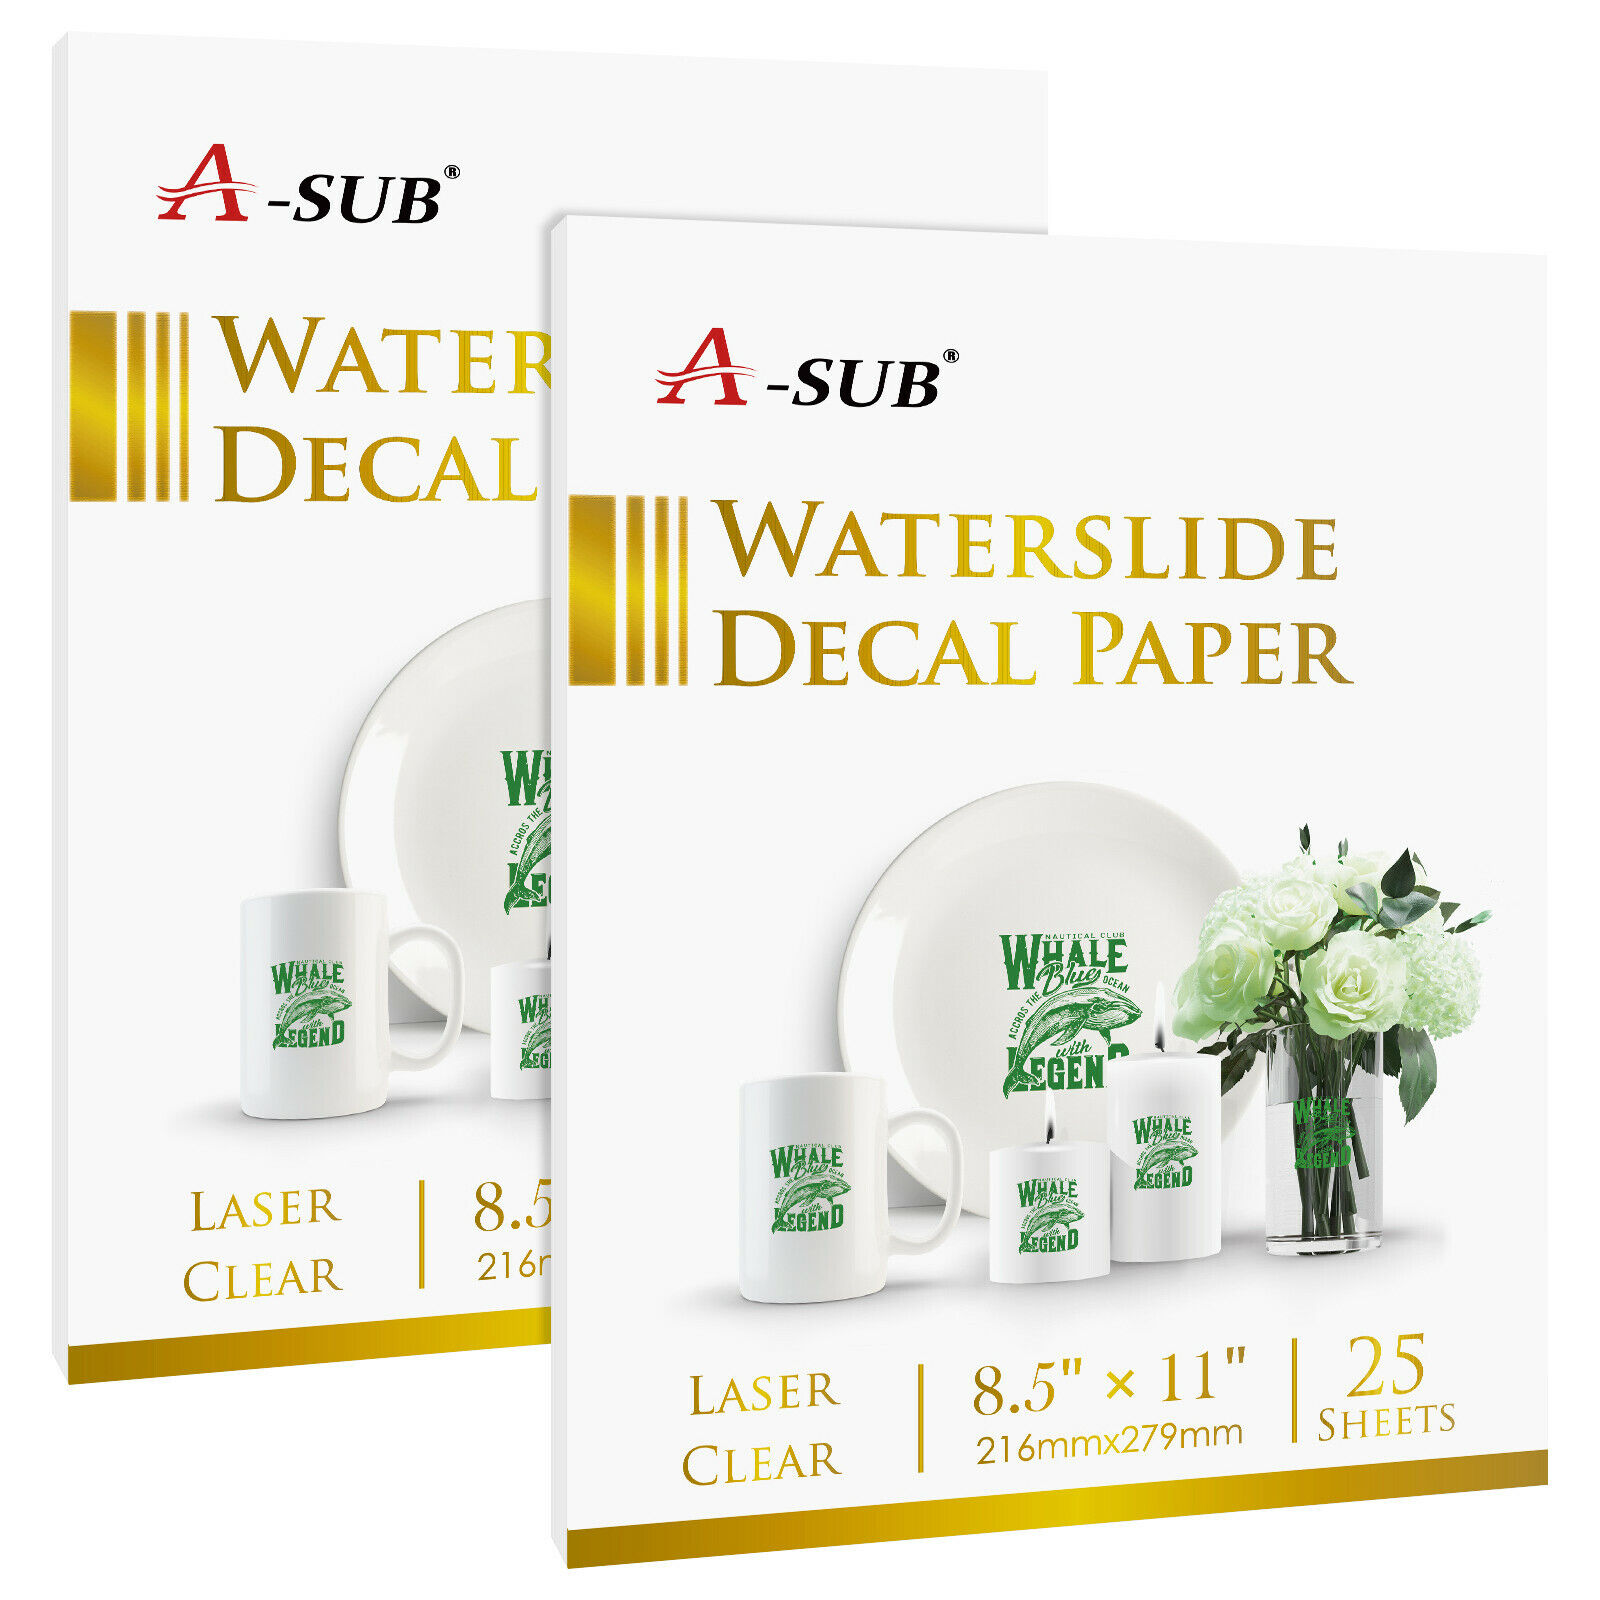 A-SUB 50 Sheets 8.5x11 Laser CLEAR Waterslide Decal Paper Water Slide Transfer